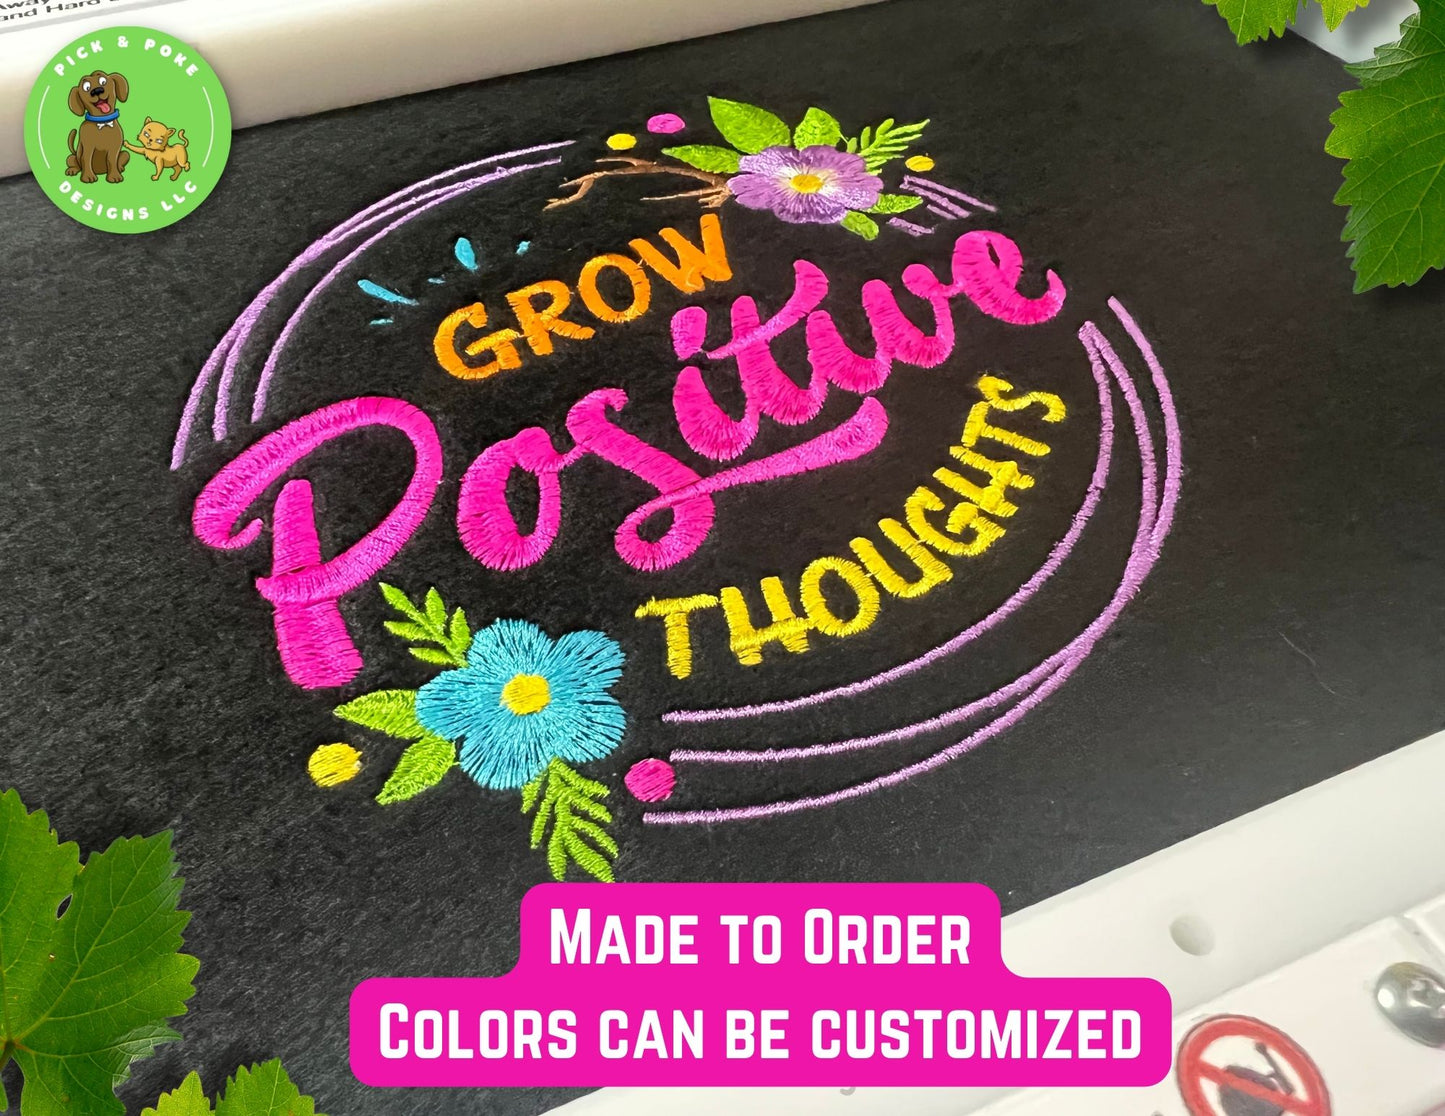 Grow Positive Thoughts Embroidered Sweatshirt | Inspirational Quote Crewneck